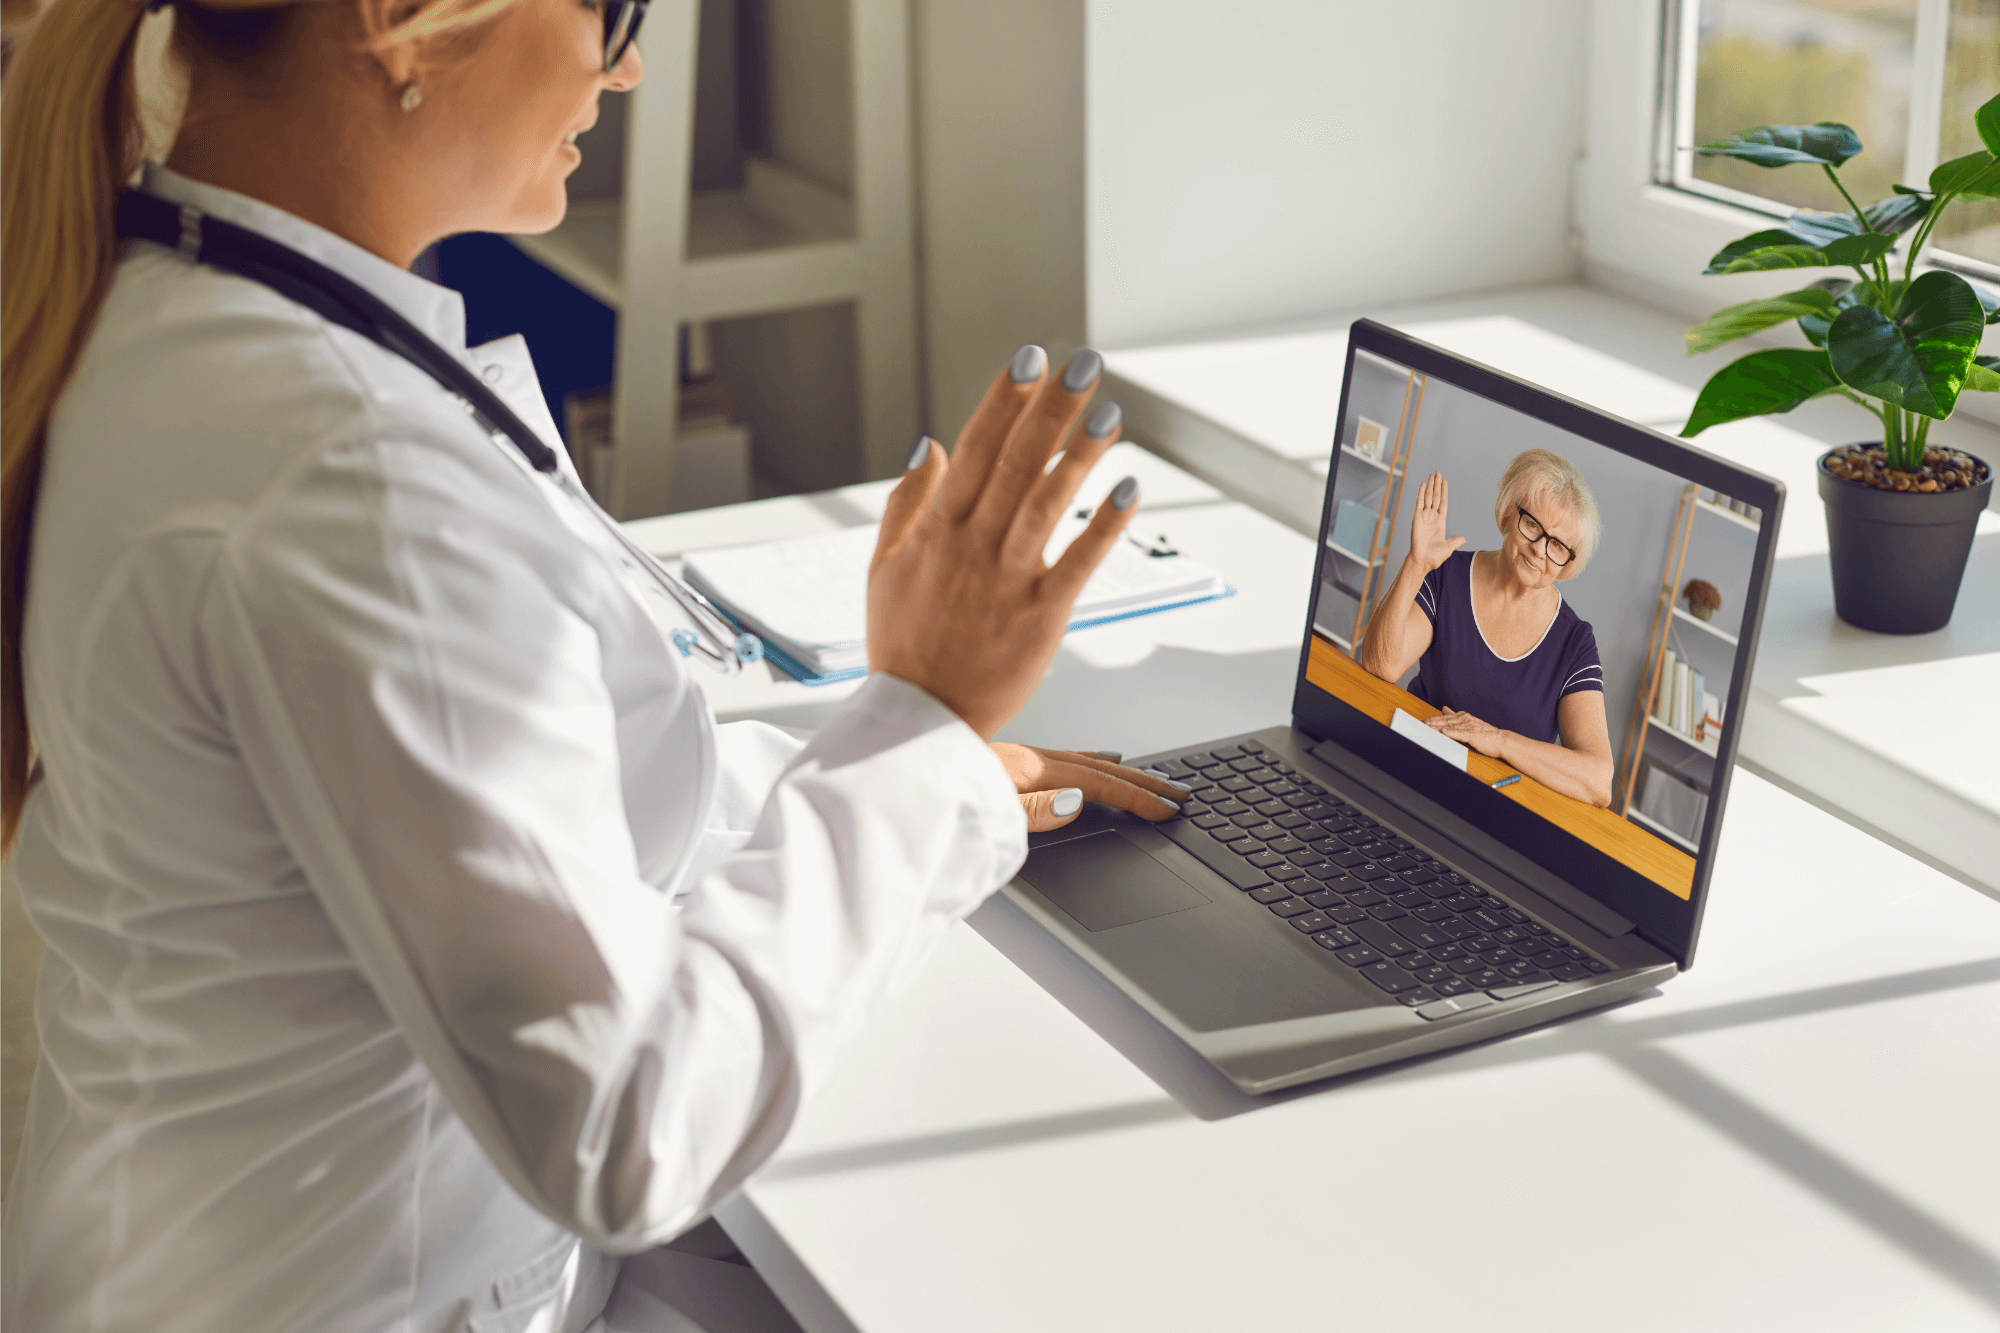 Telehealth benefits and challenges